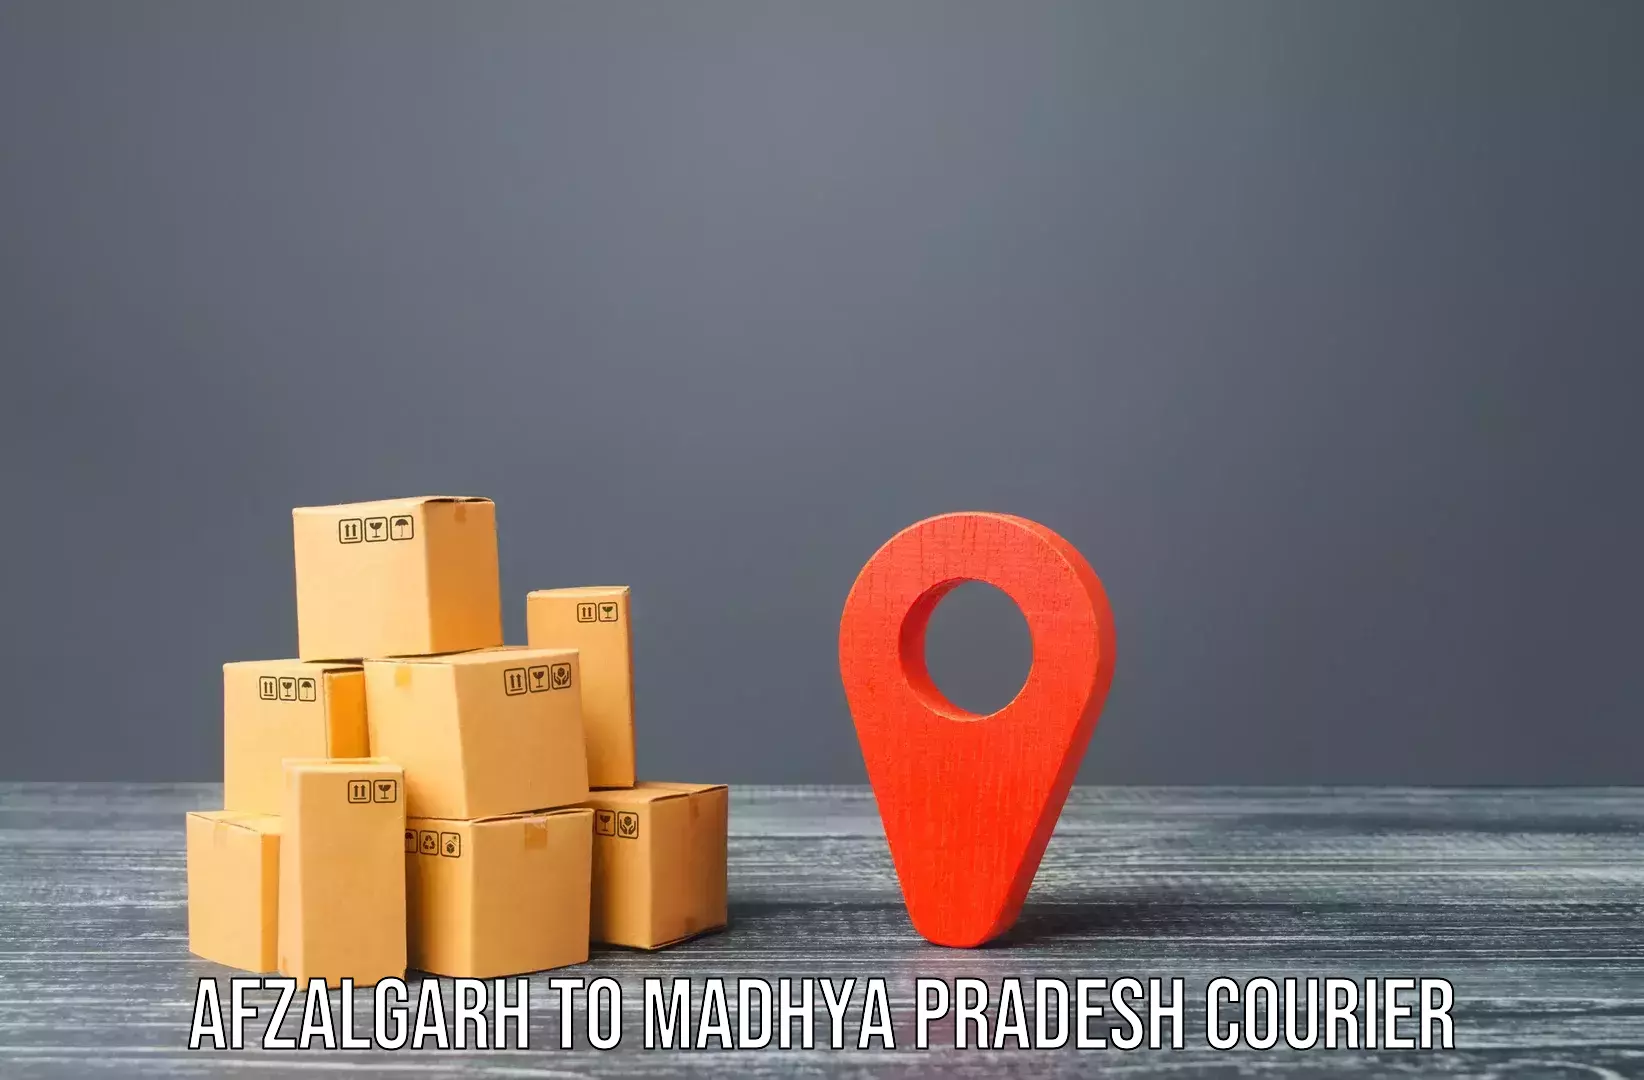 Quality relocation services Afzalgarh to Maheshwar